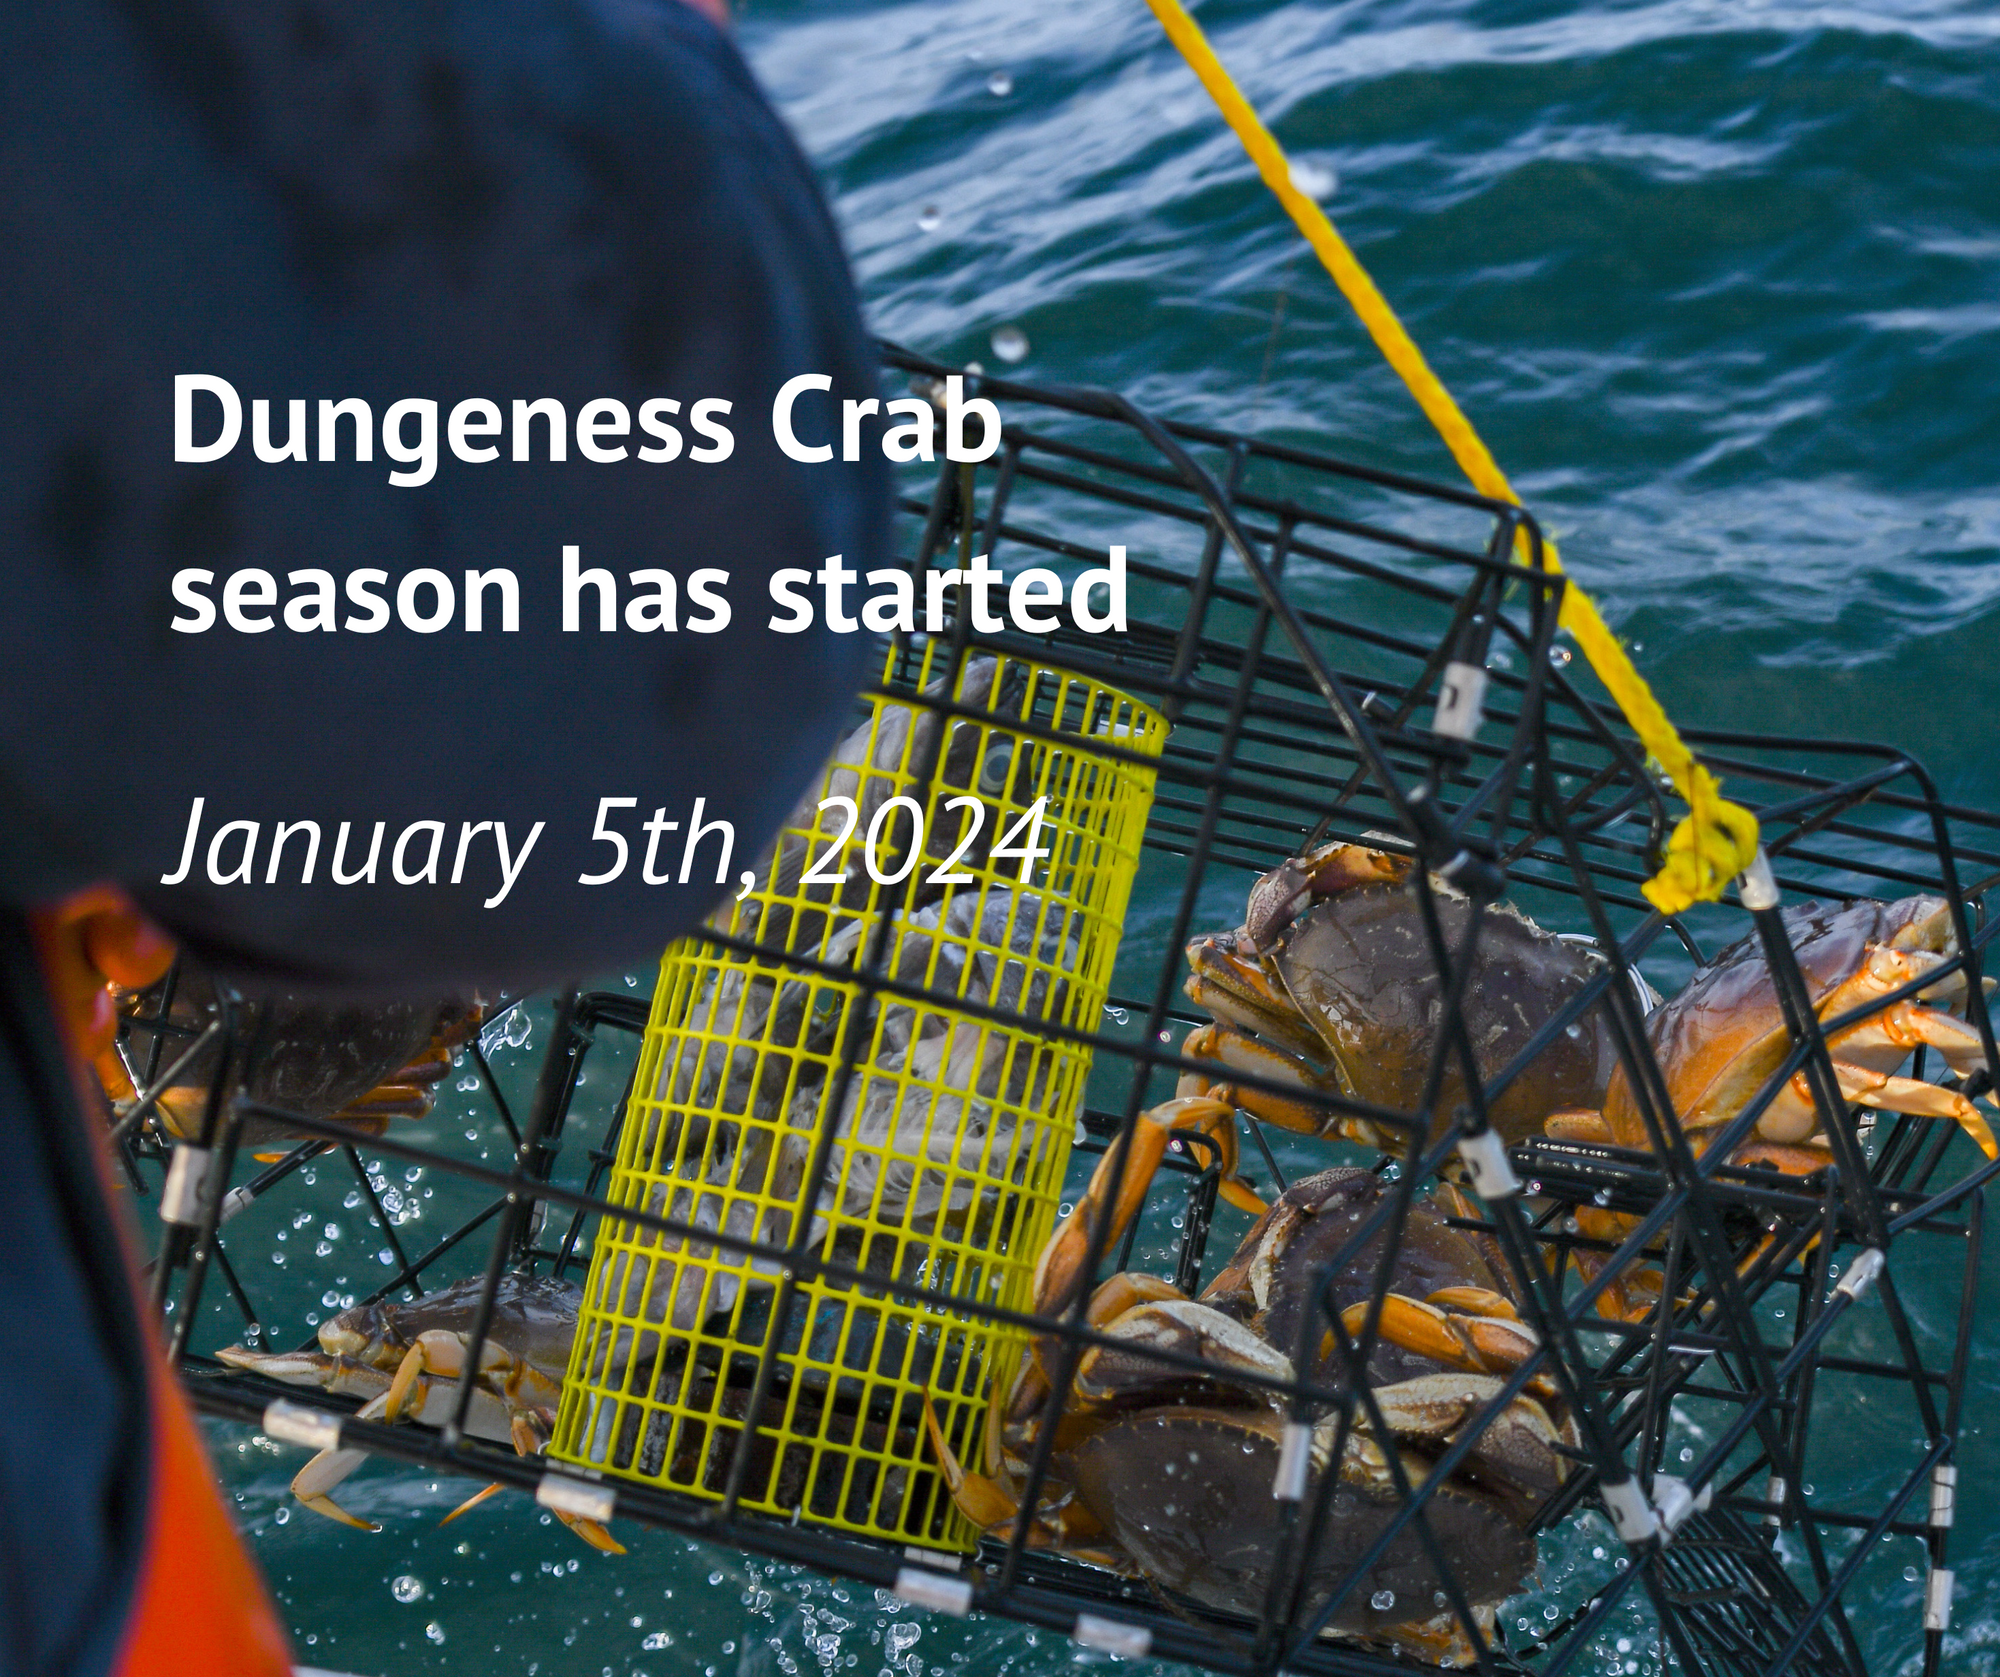 The Dungeness Crab season kicks off today on January 5th